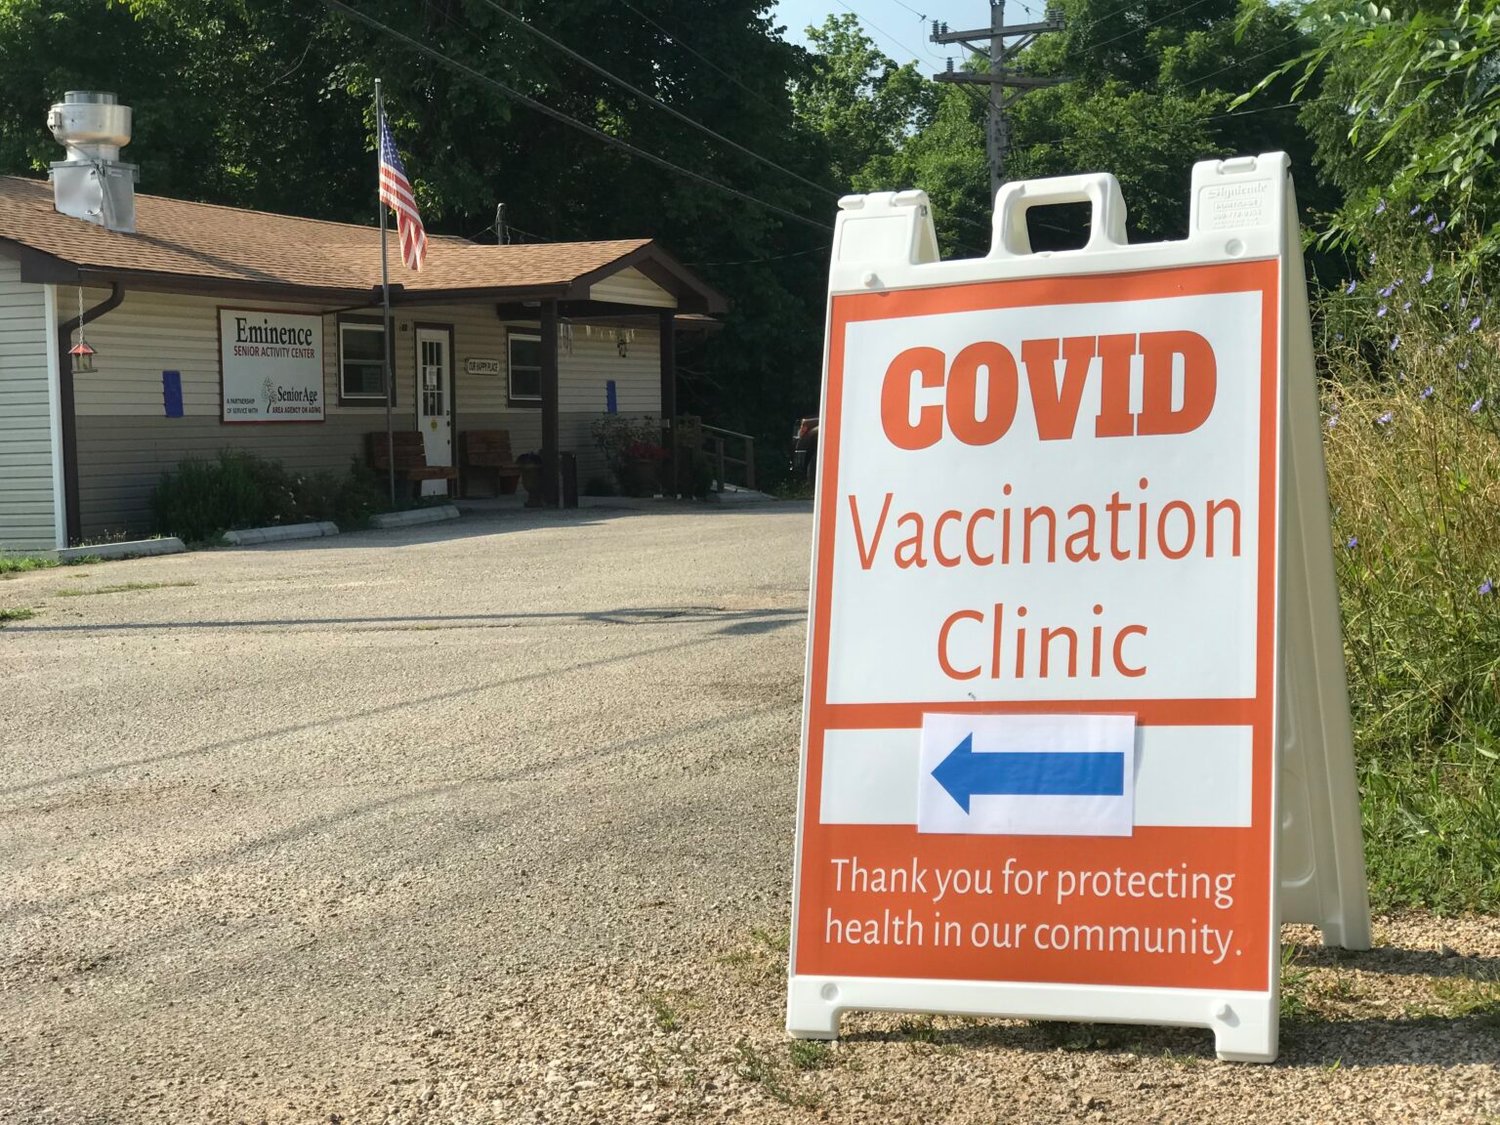 A sign advertises COVID vaccinations. A study estimates that 8,585 deaths in Missouri could have been prevented if 100% of adults had been vaccinated. Photo by Tessa Weinber/Missouri Independent